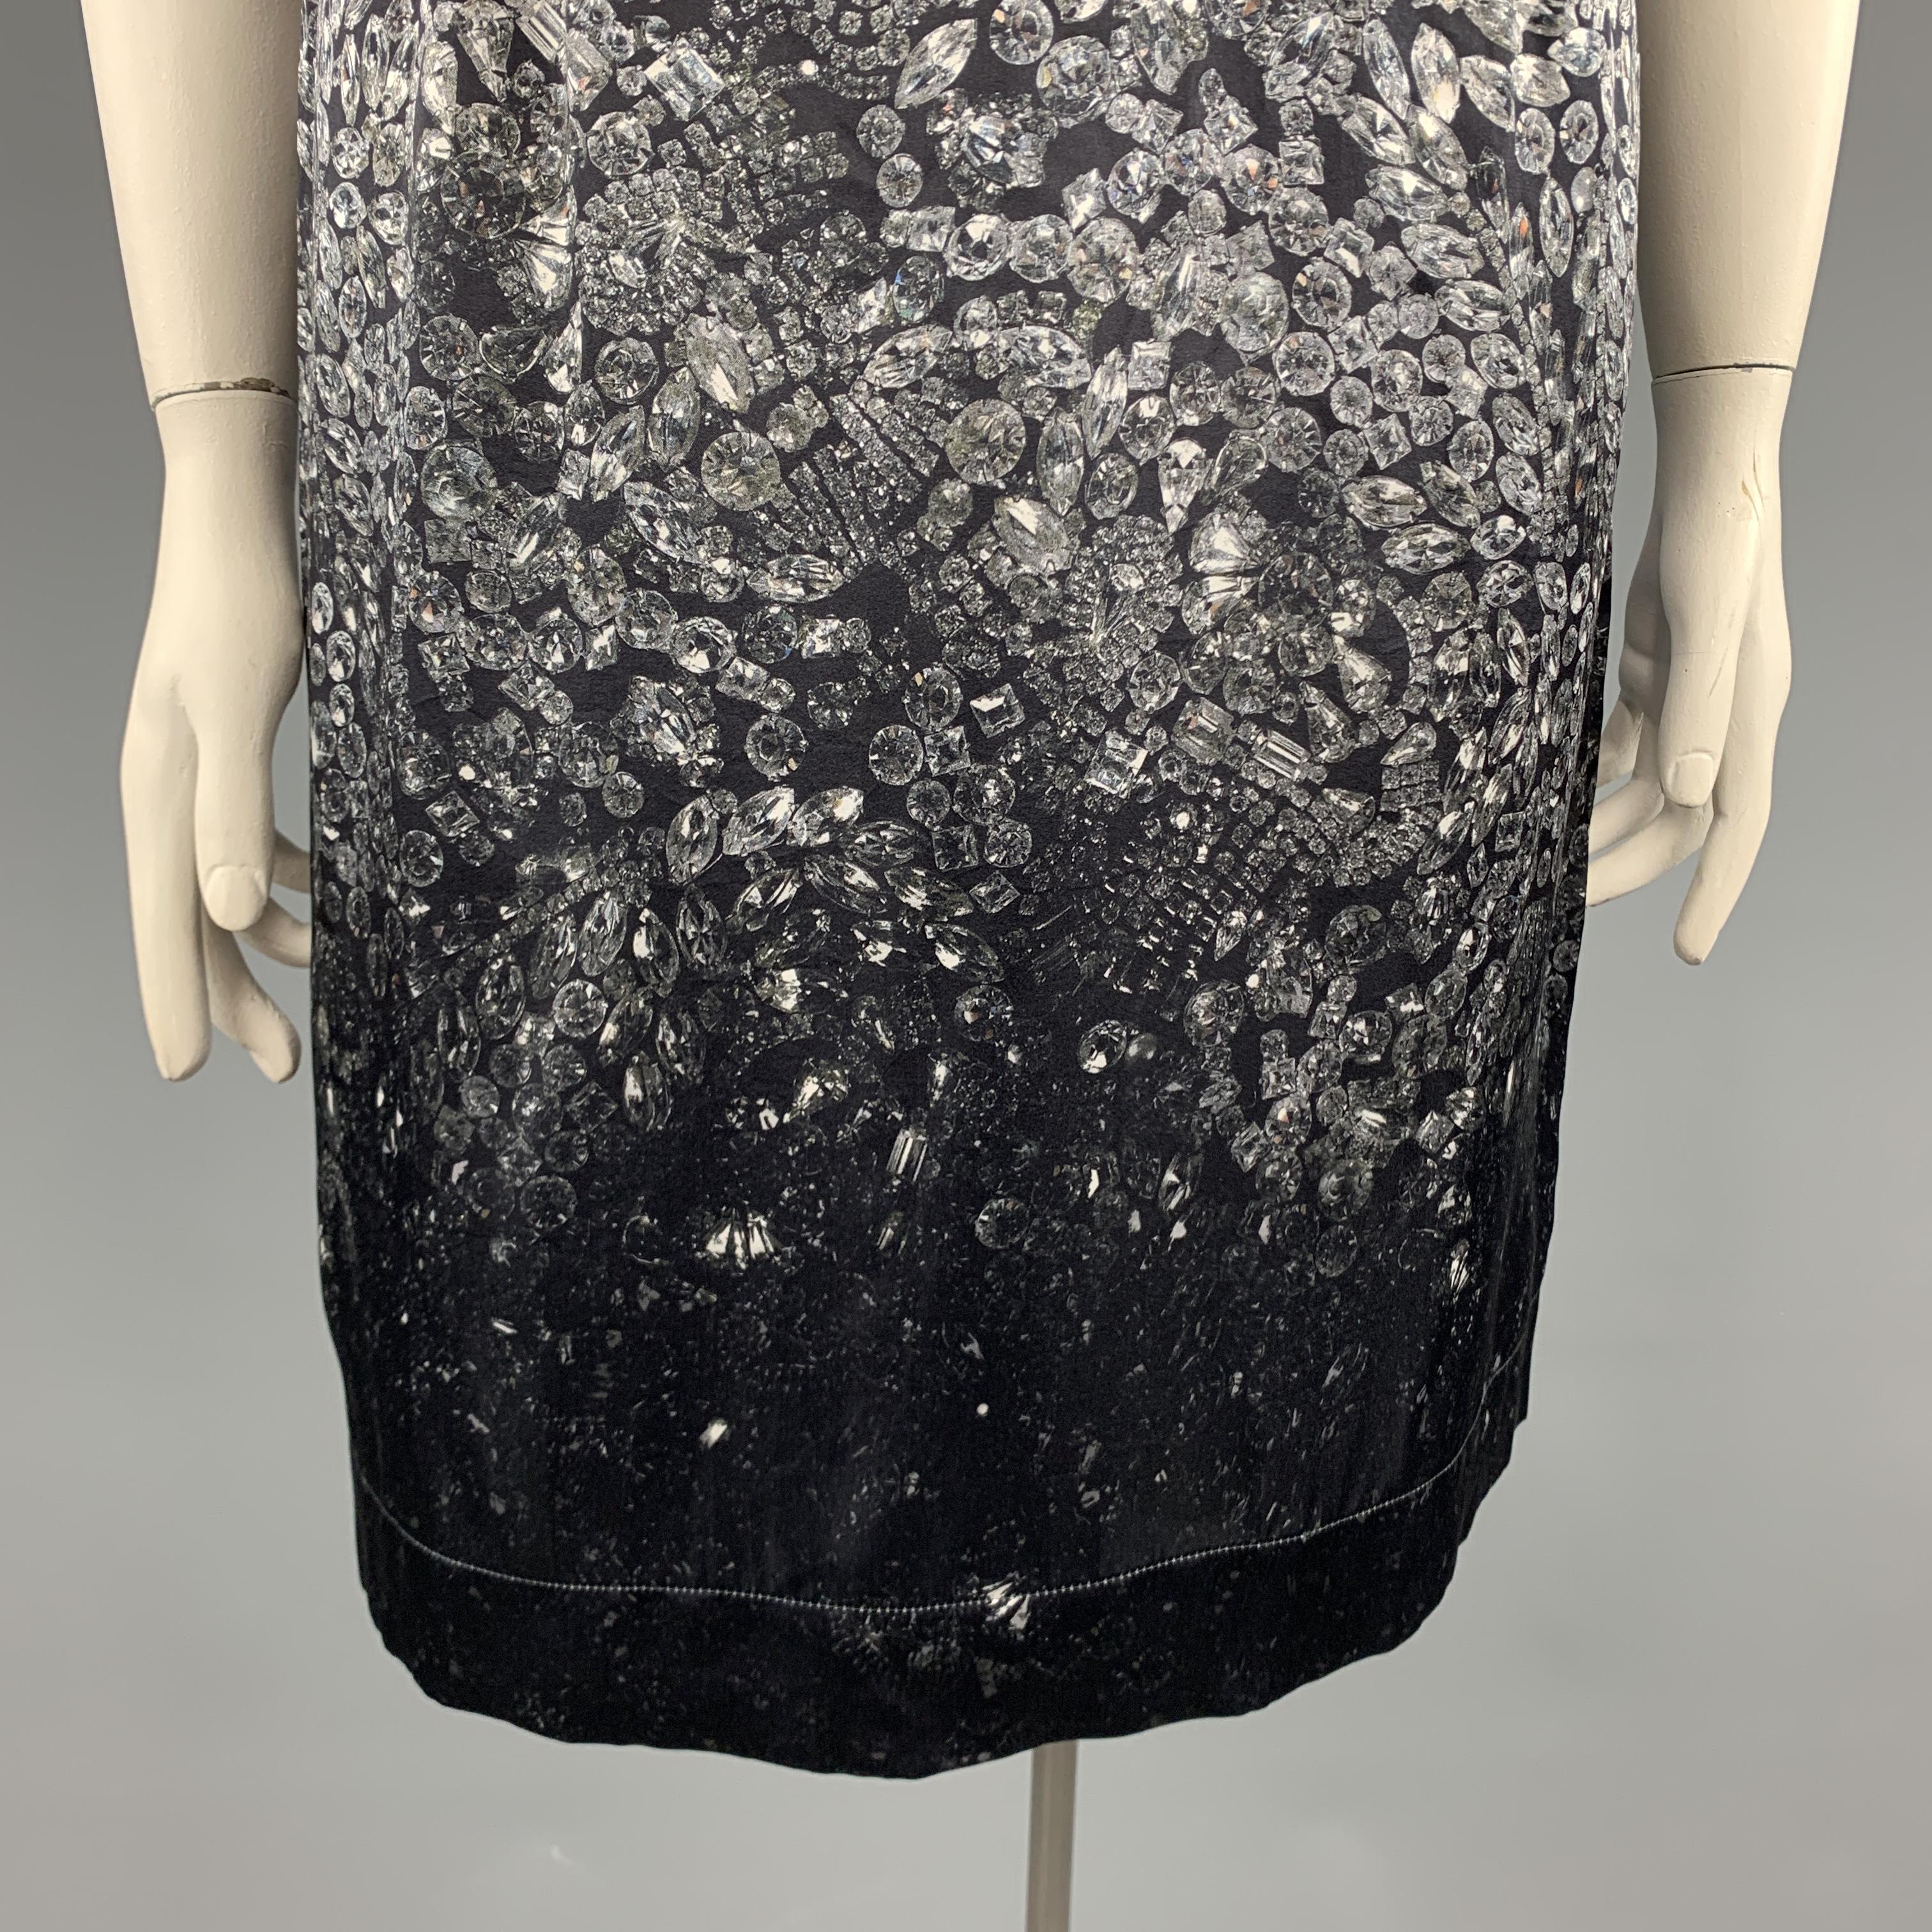 LANVIN sleeveless shift dress comes in a silk blend satin with all over ombre diamonds print and raw stitched edges. 

Excellent Pre-Owned Condition.
Marked: IT 44

Measurements:

l	Shoulder: 16 in.
l	Bust: 40 in.
l	Waist: 32 in.
l	Hip: 43